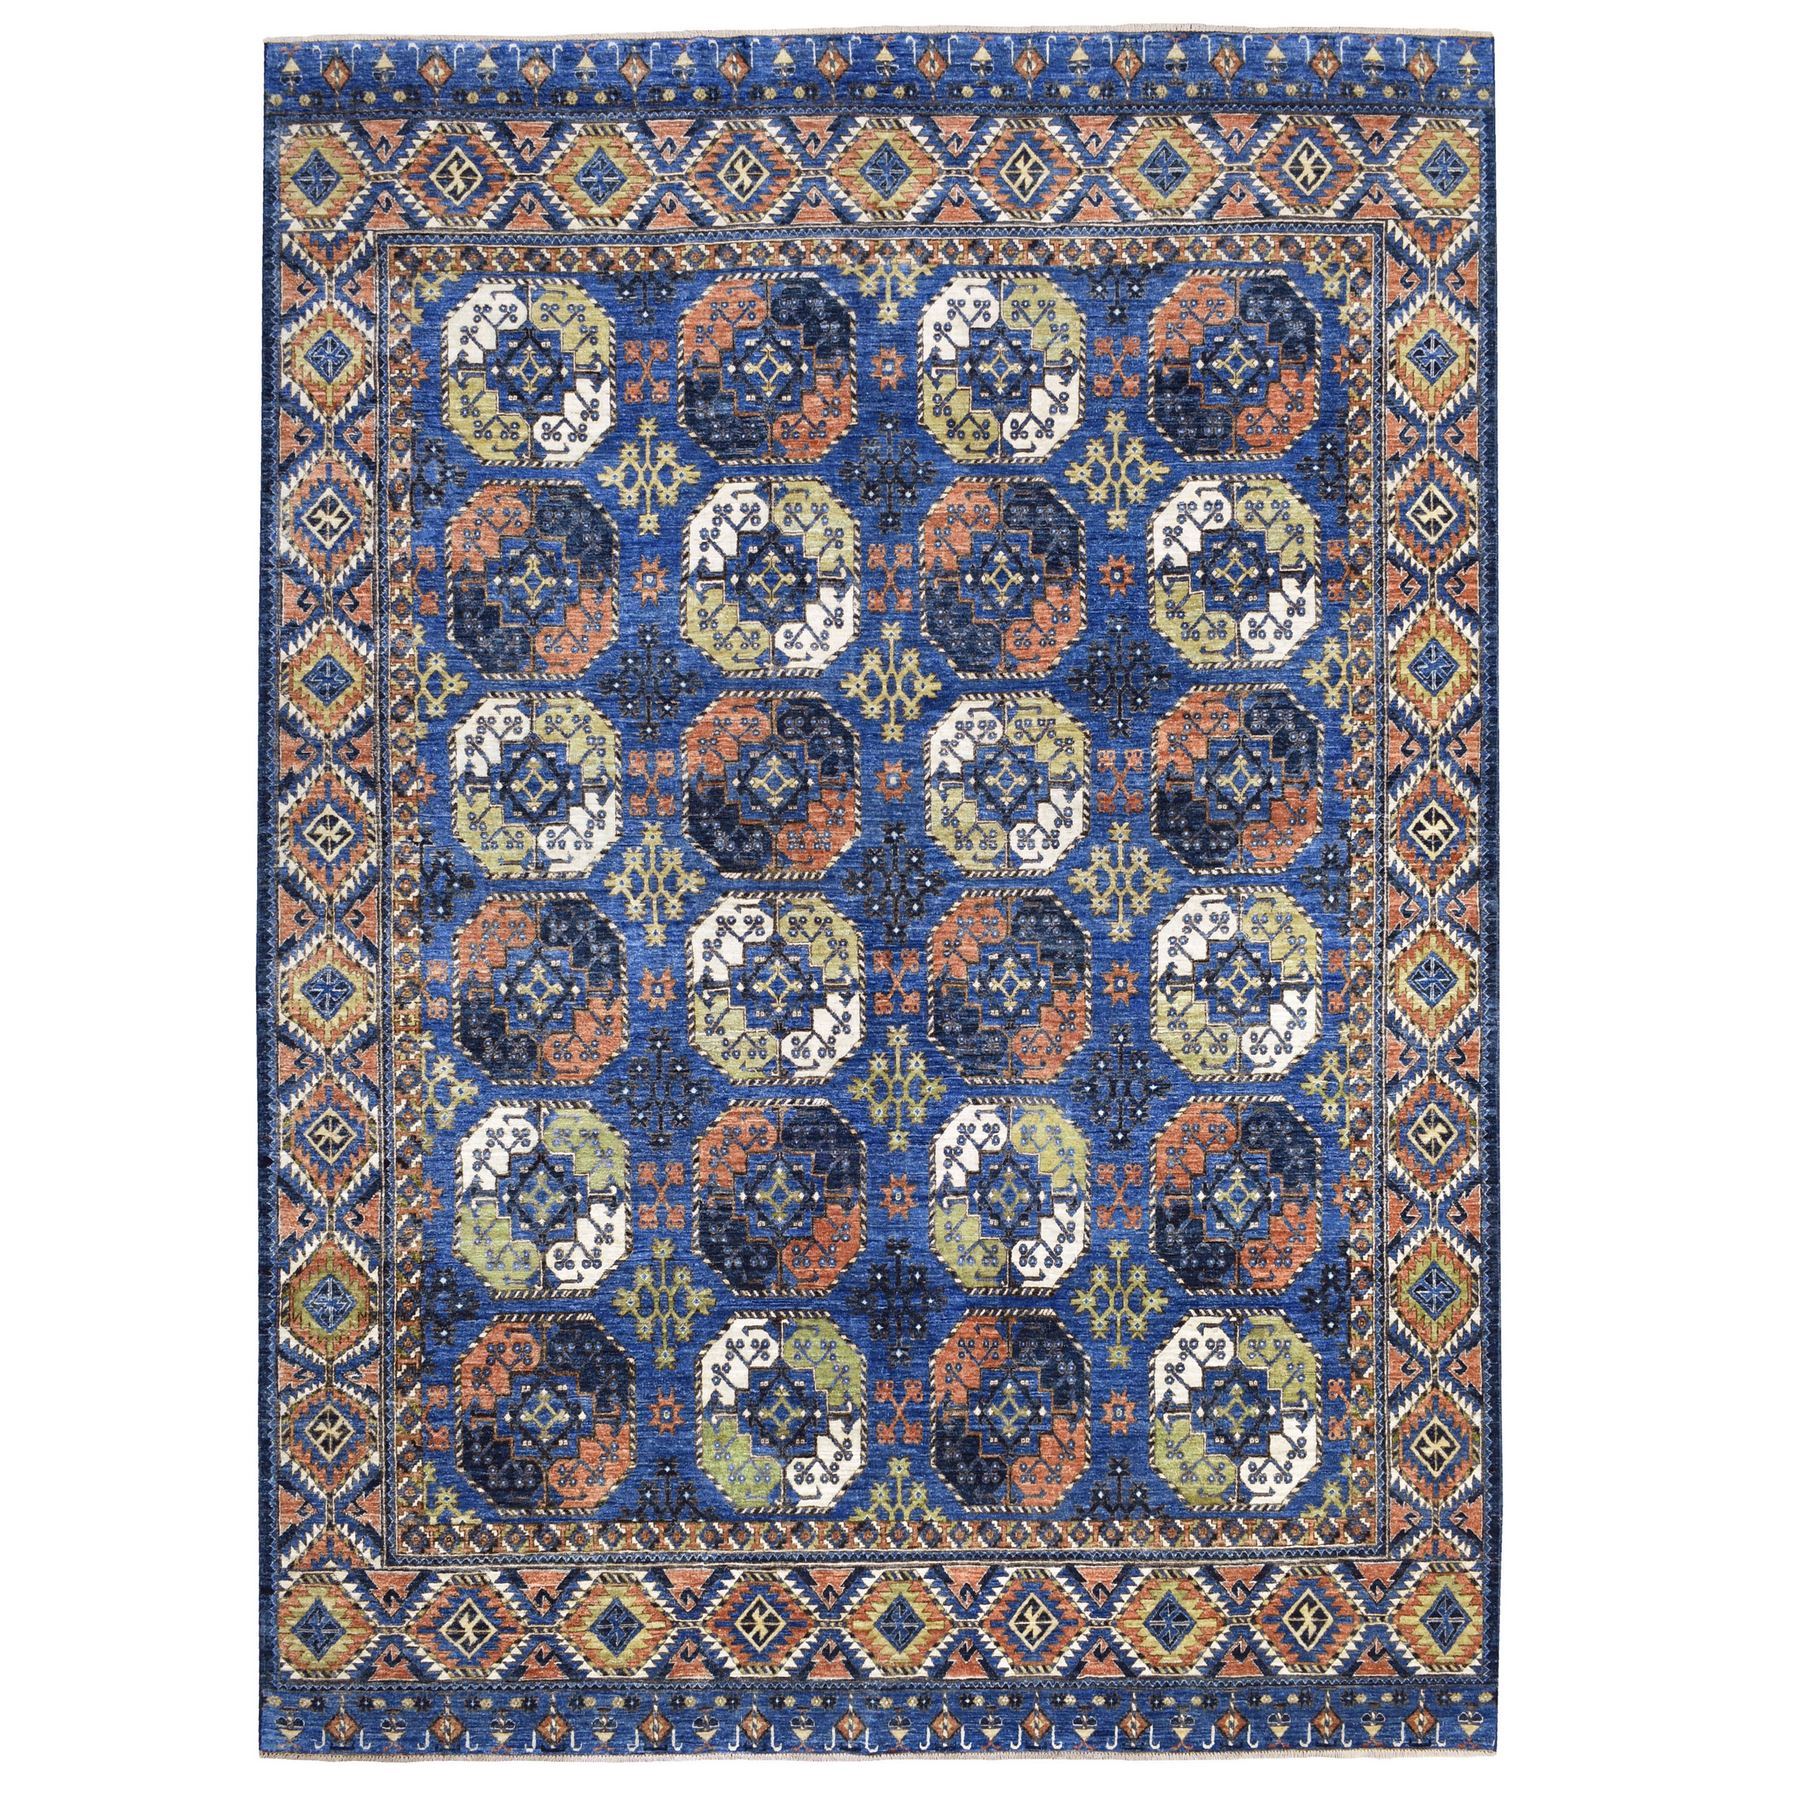 Nomadic And Village Collection Hand Knotted Blue Rug No: 1134526